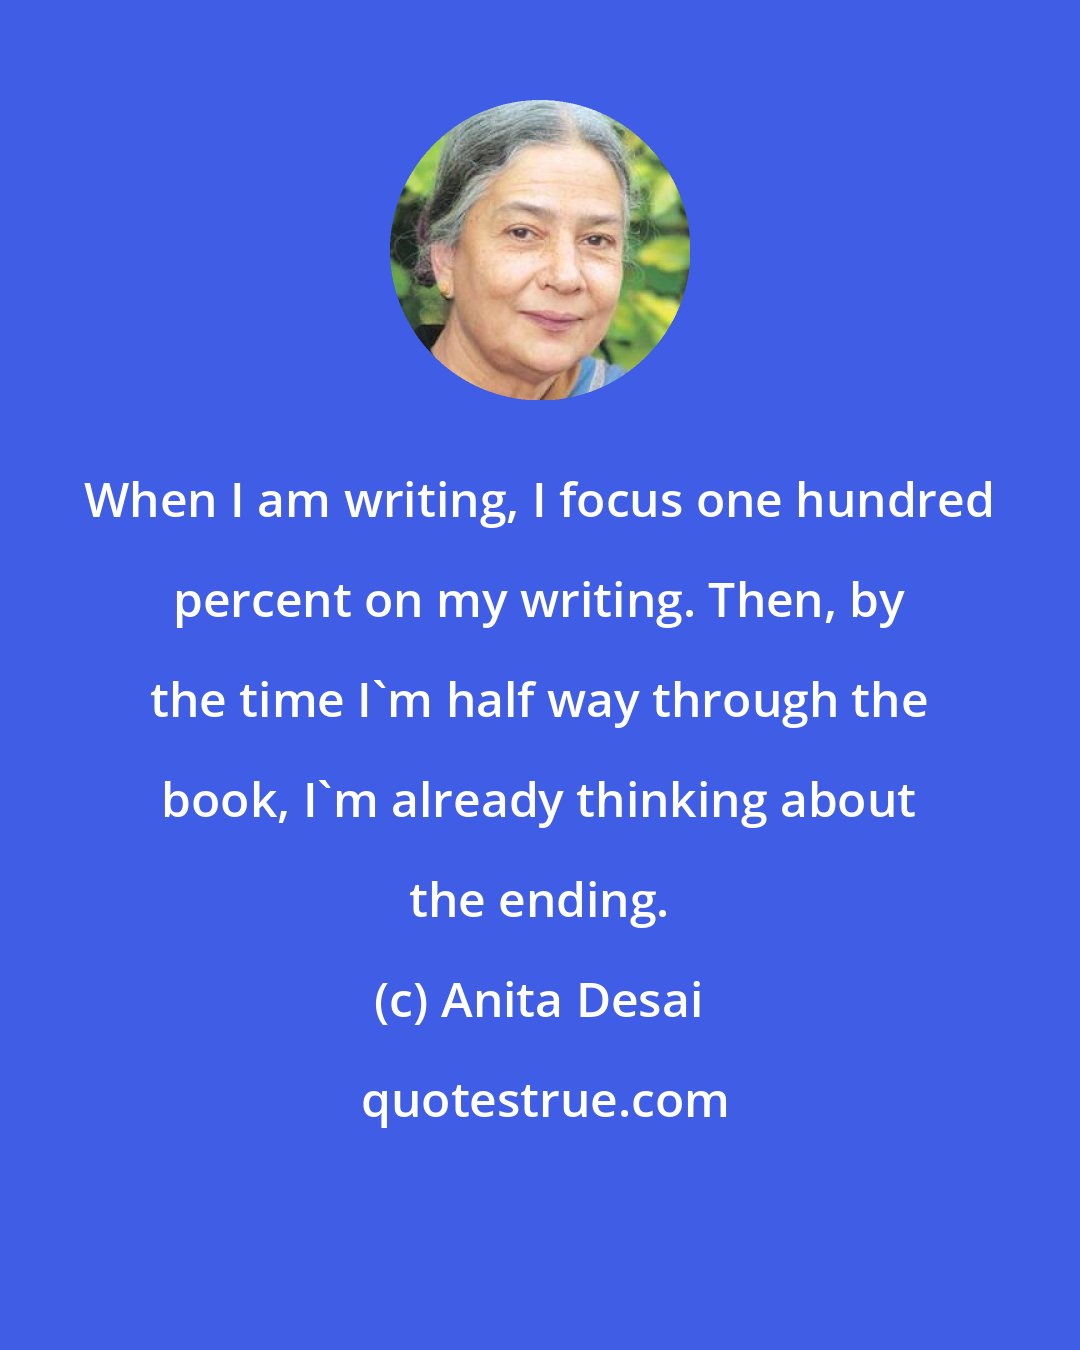 Anita Desai: When I am writing, I focus one hundred percent on my writing. Then, by the time I'm half way through the book, I'm already thinking about the ending.